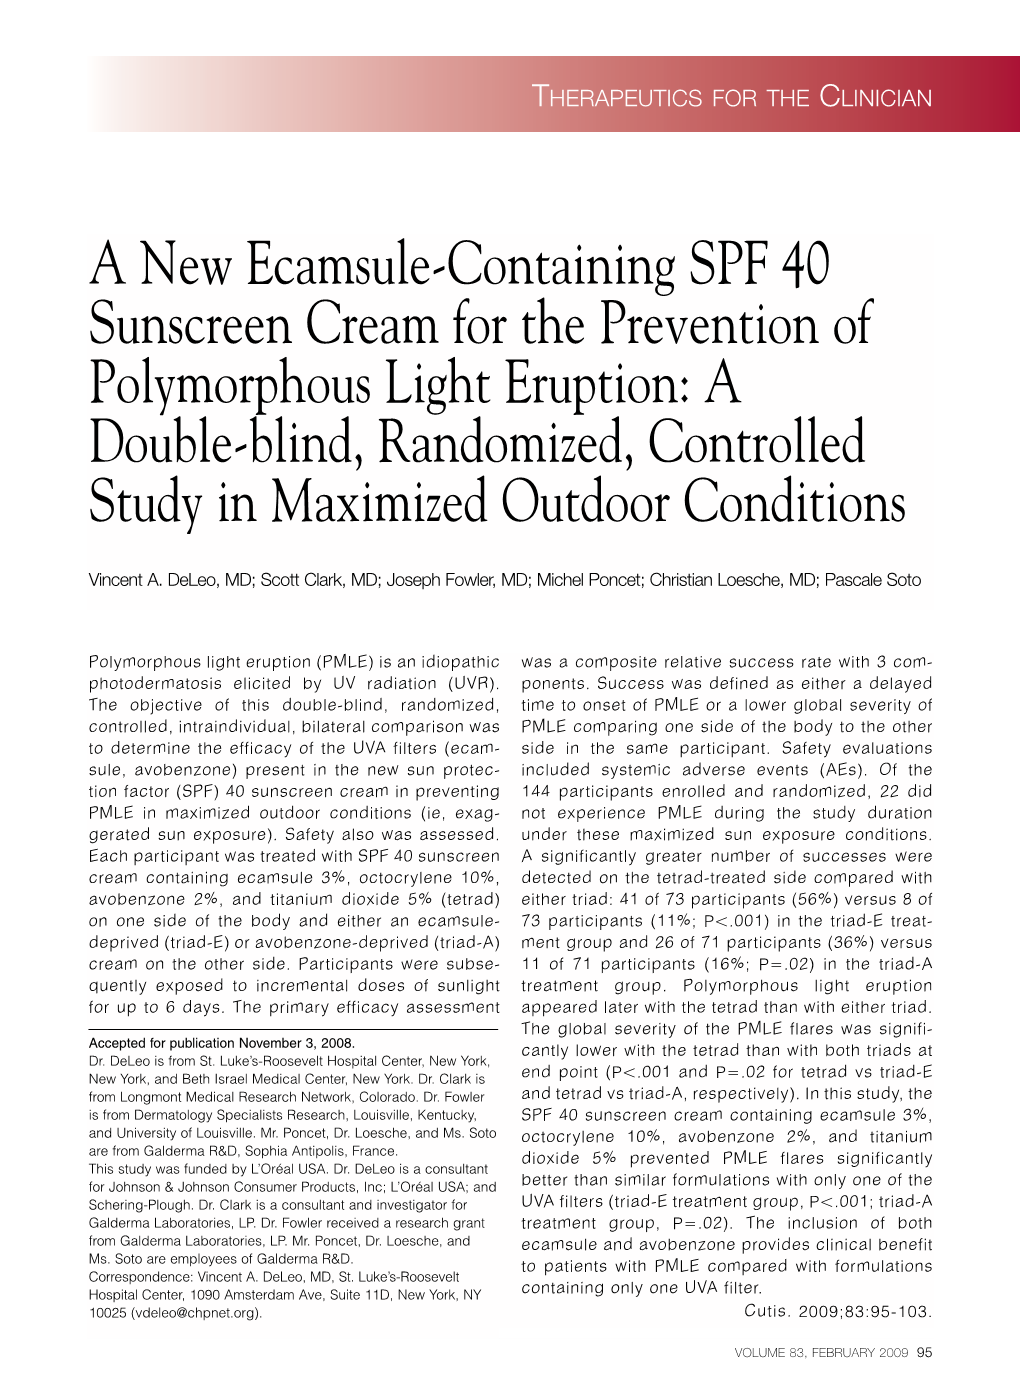 A New Ecamsule-Containing SPF 40 Sunscreen Cream for The